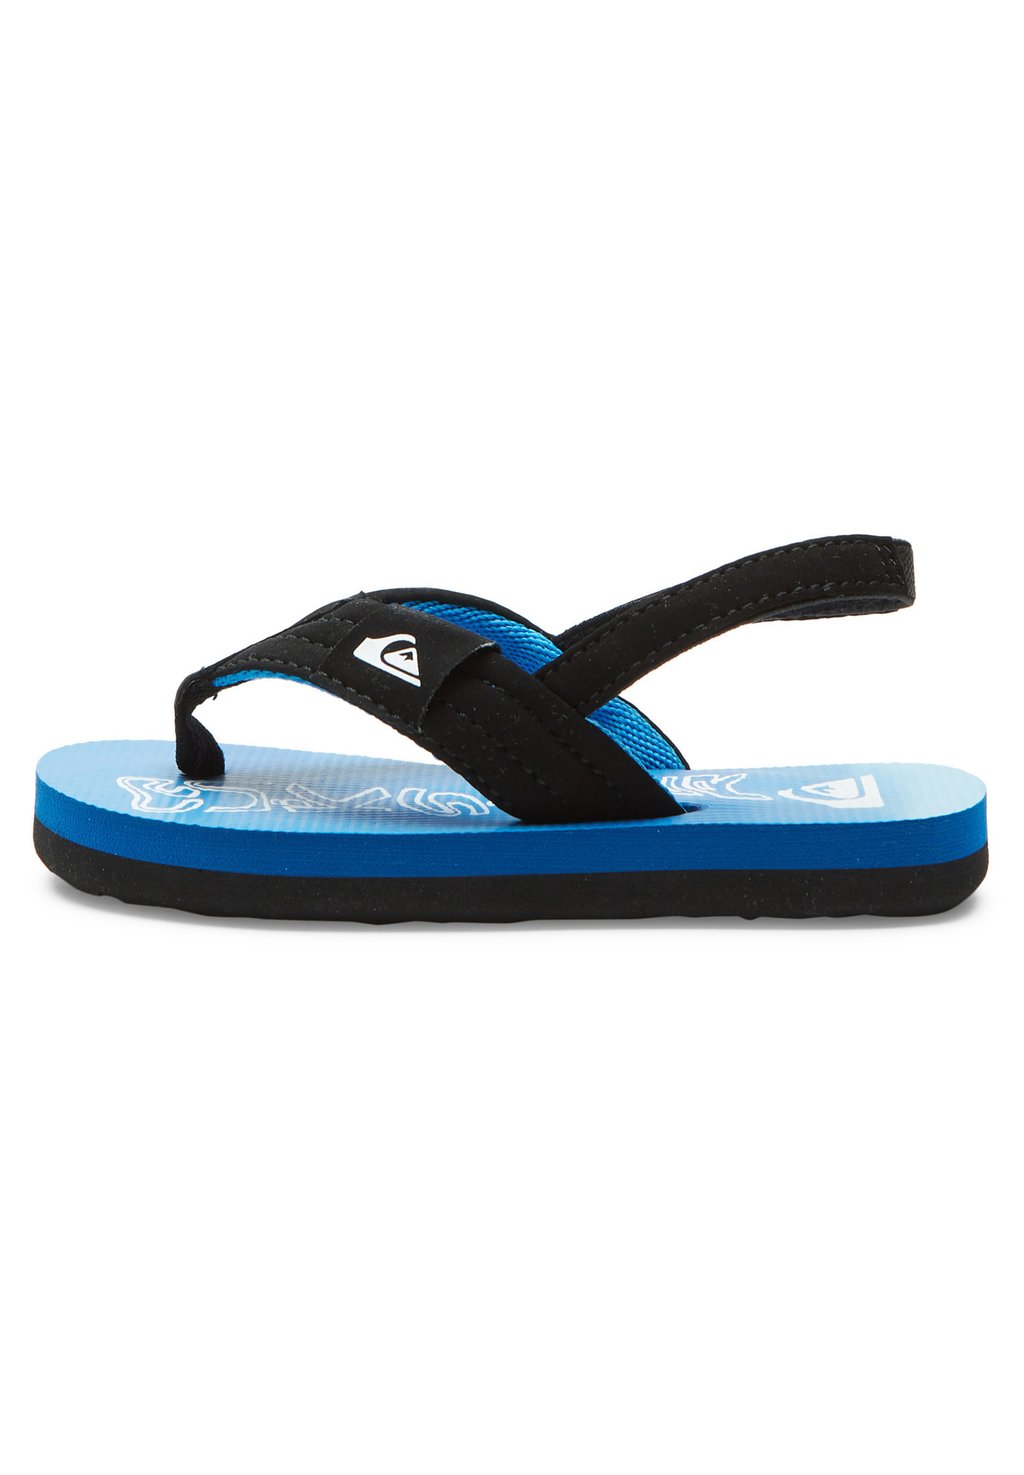 шлепанцы molokai 4th of july quiksilver цвет blue 2 Шлепанцы MOLOKAI LAYBACK Quiksilver, цвет blue